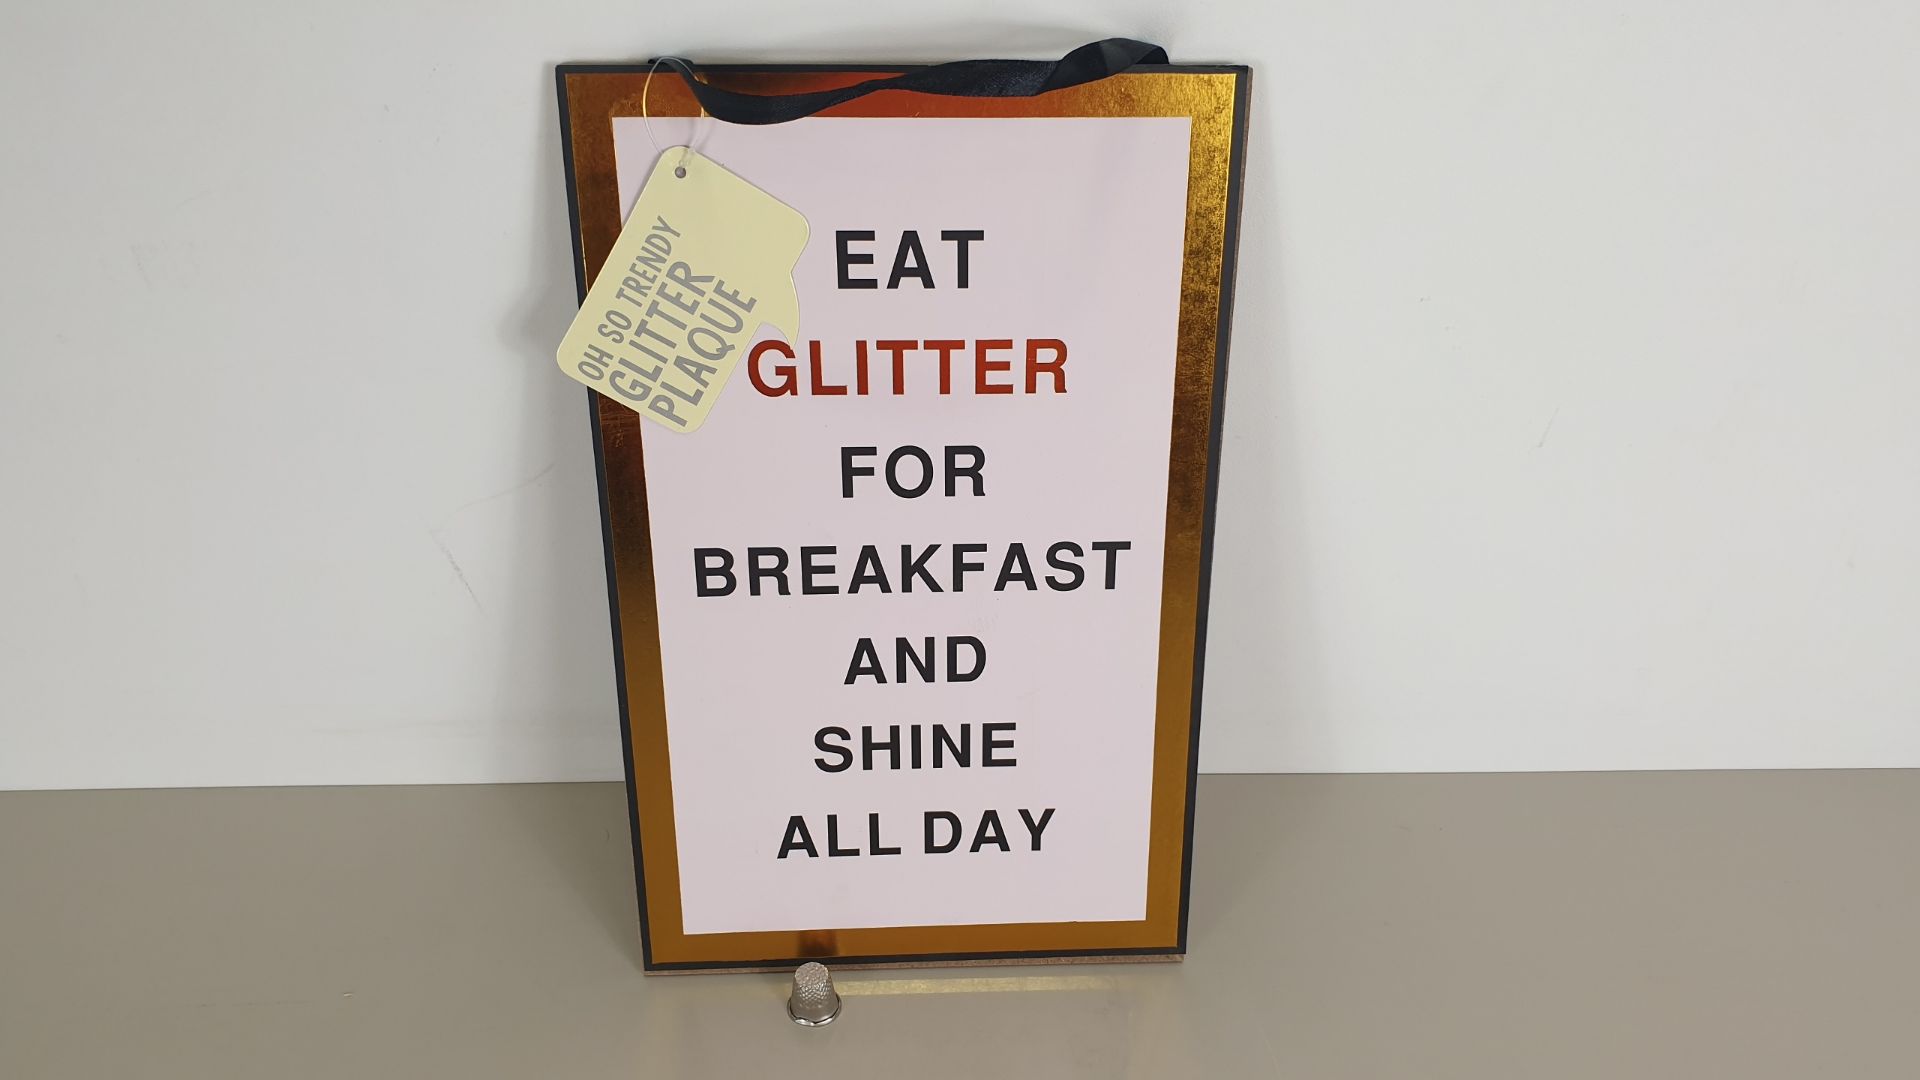 360 X BRAND NEW GOLD FOIL PLAQUES "EAT GLITTER FOR BREAKFAST AND SHINE ALL DAY" IN 15 BOXES